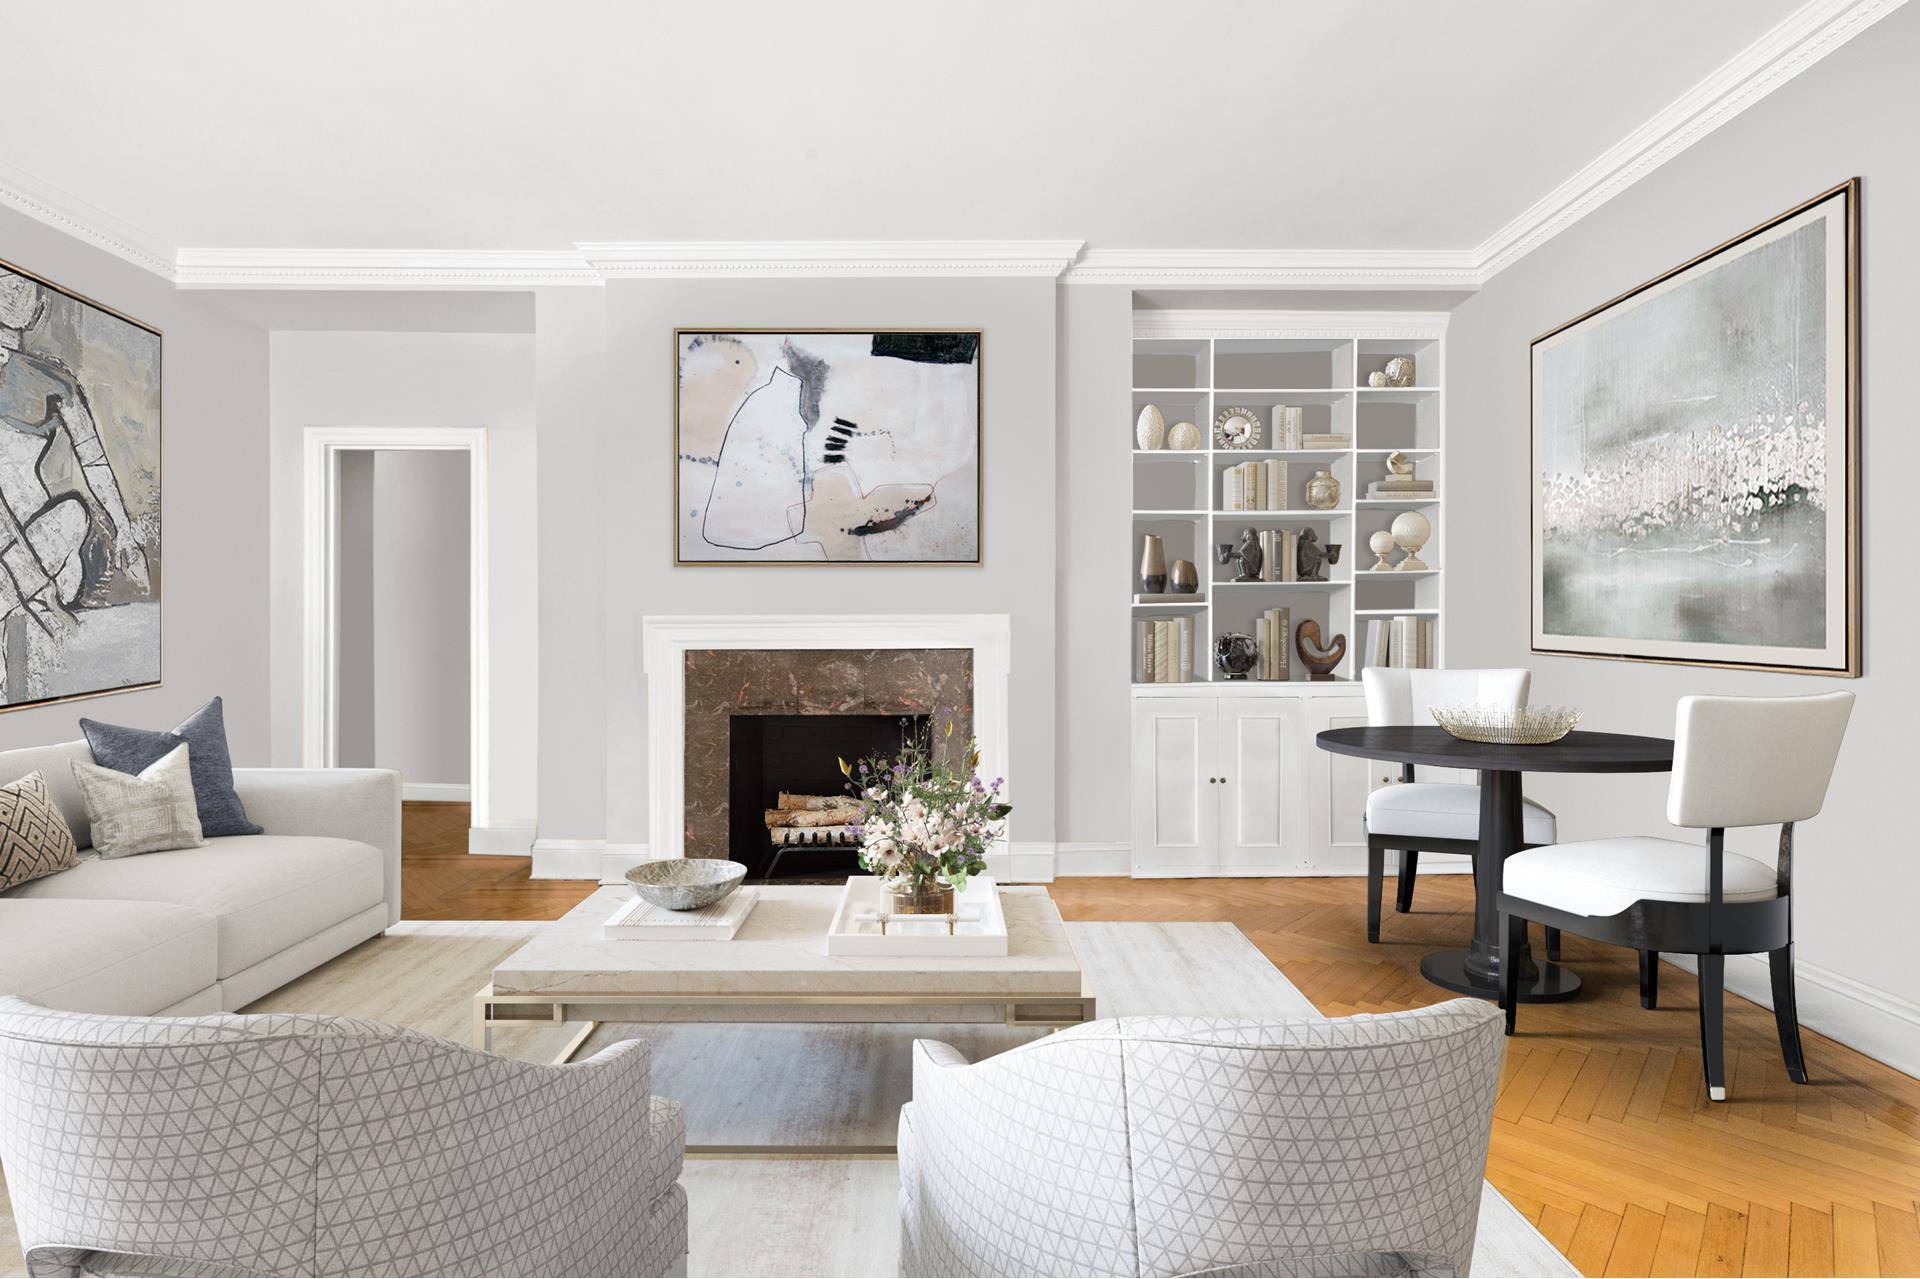 14 Sutton Place South, a distinguished prewar Cooperative designed in 1929 by famed architect Rosario Candela, is one of the most coveted buildings in one of the most desirable areas ...